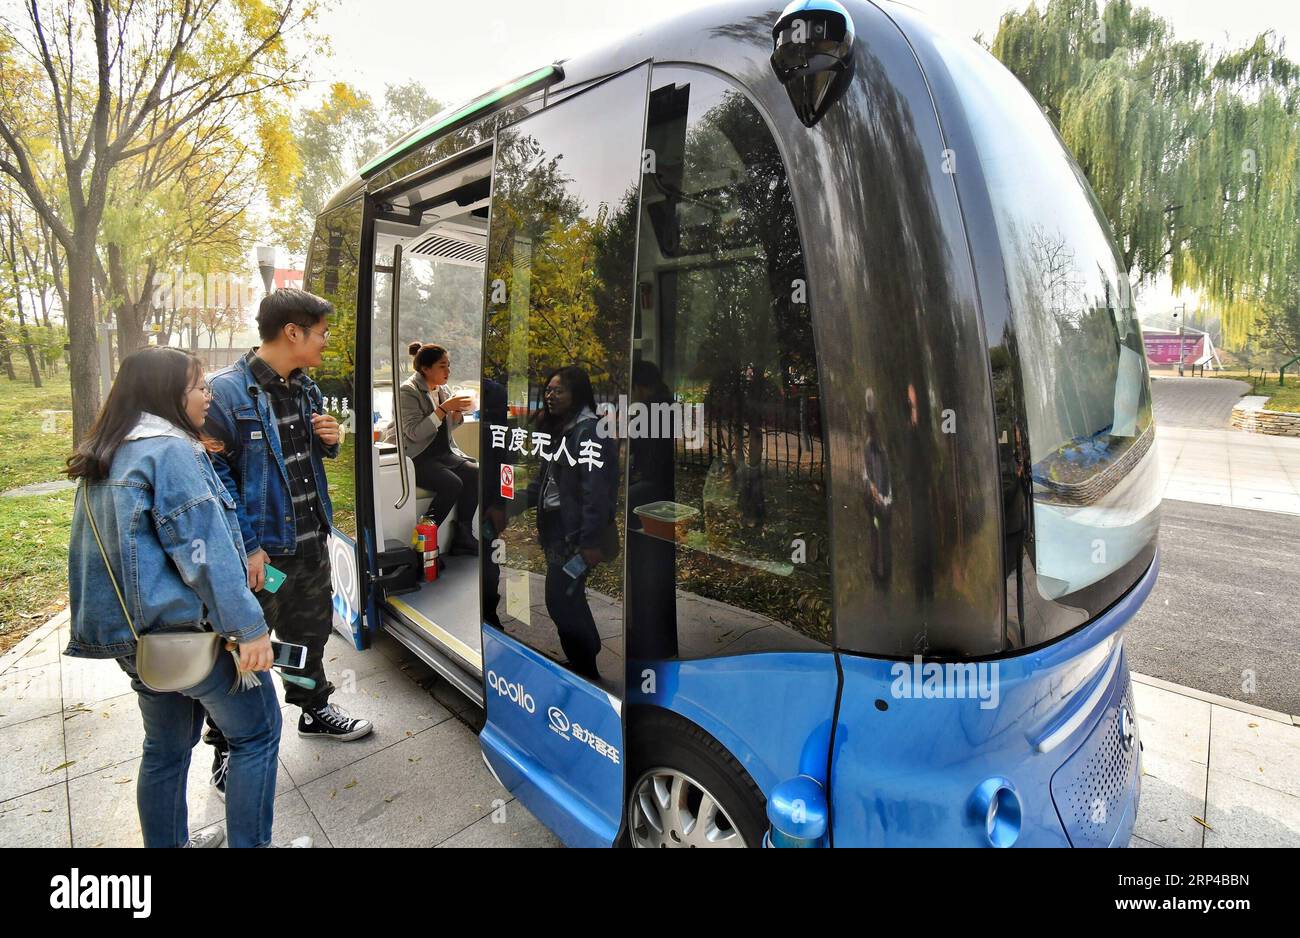 (181103) -- BEIJING, Nov. 3, 2018 -- Citizens get on an unmanned sightseeing bus at an AI park in Haidian District in Beijing, capital of China, on Nov. 3, 2018. An AI park co-built by Haidian authorities and Baidu, China s search engine giant, was opened to the public recently. The park is equipped with various AI facilities, such as intelligent running track, unmanned sightseeing bus and face recognition automat, offering AI experience for citizens. ) (sxk) CHINA-BEIJING-AI PARK (CN) LixXin PUBLICATIONxNOTxINxCHN Stock Photo